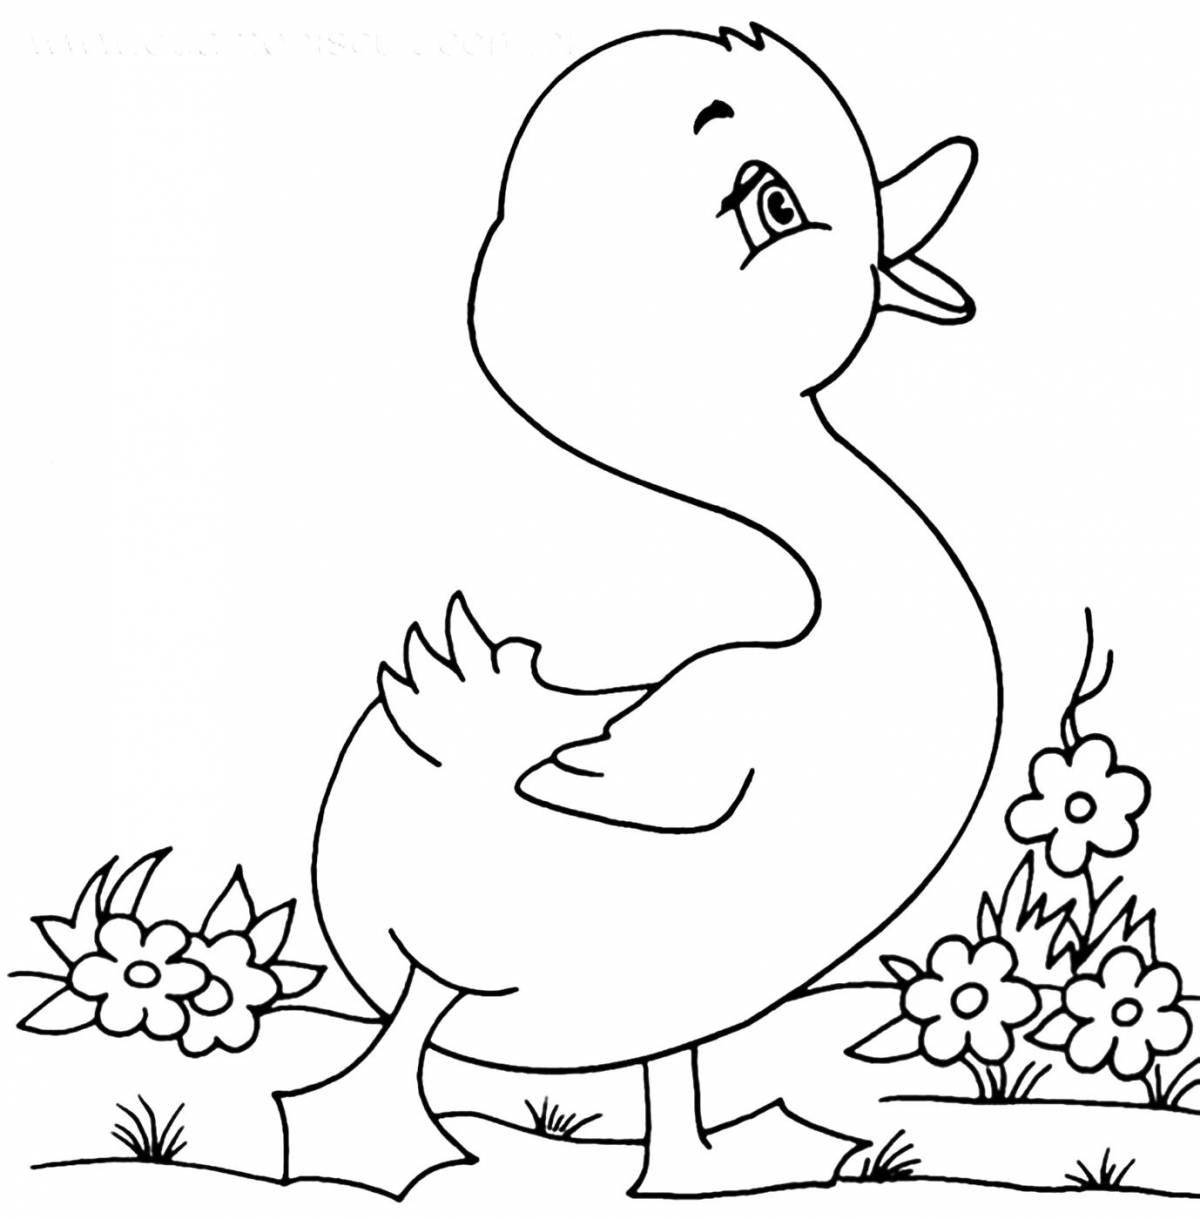 Happy ugly duckling coloring for kids